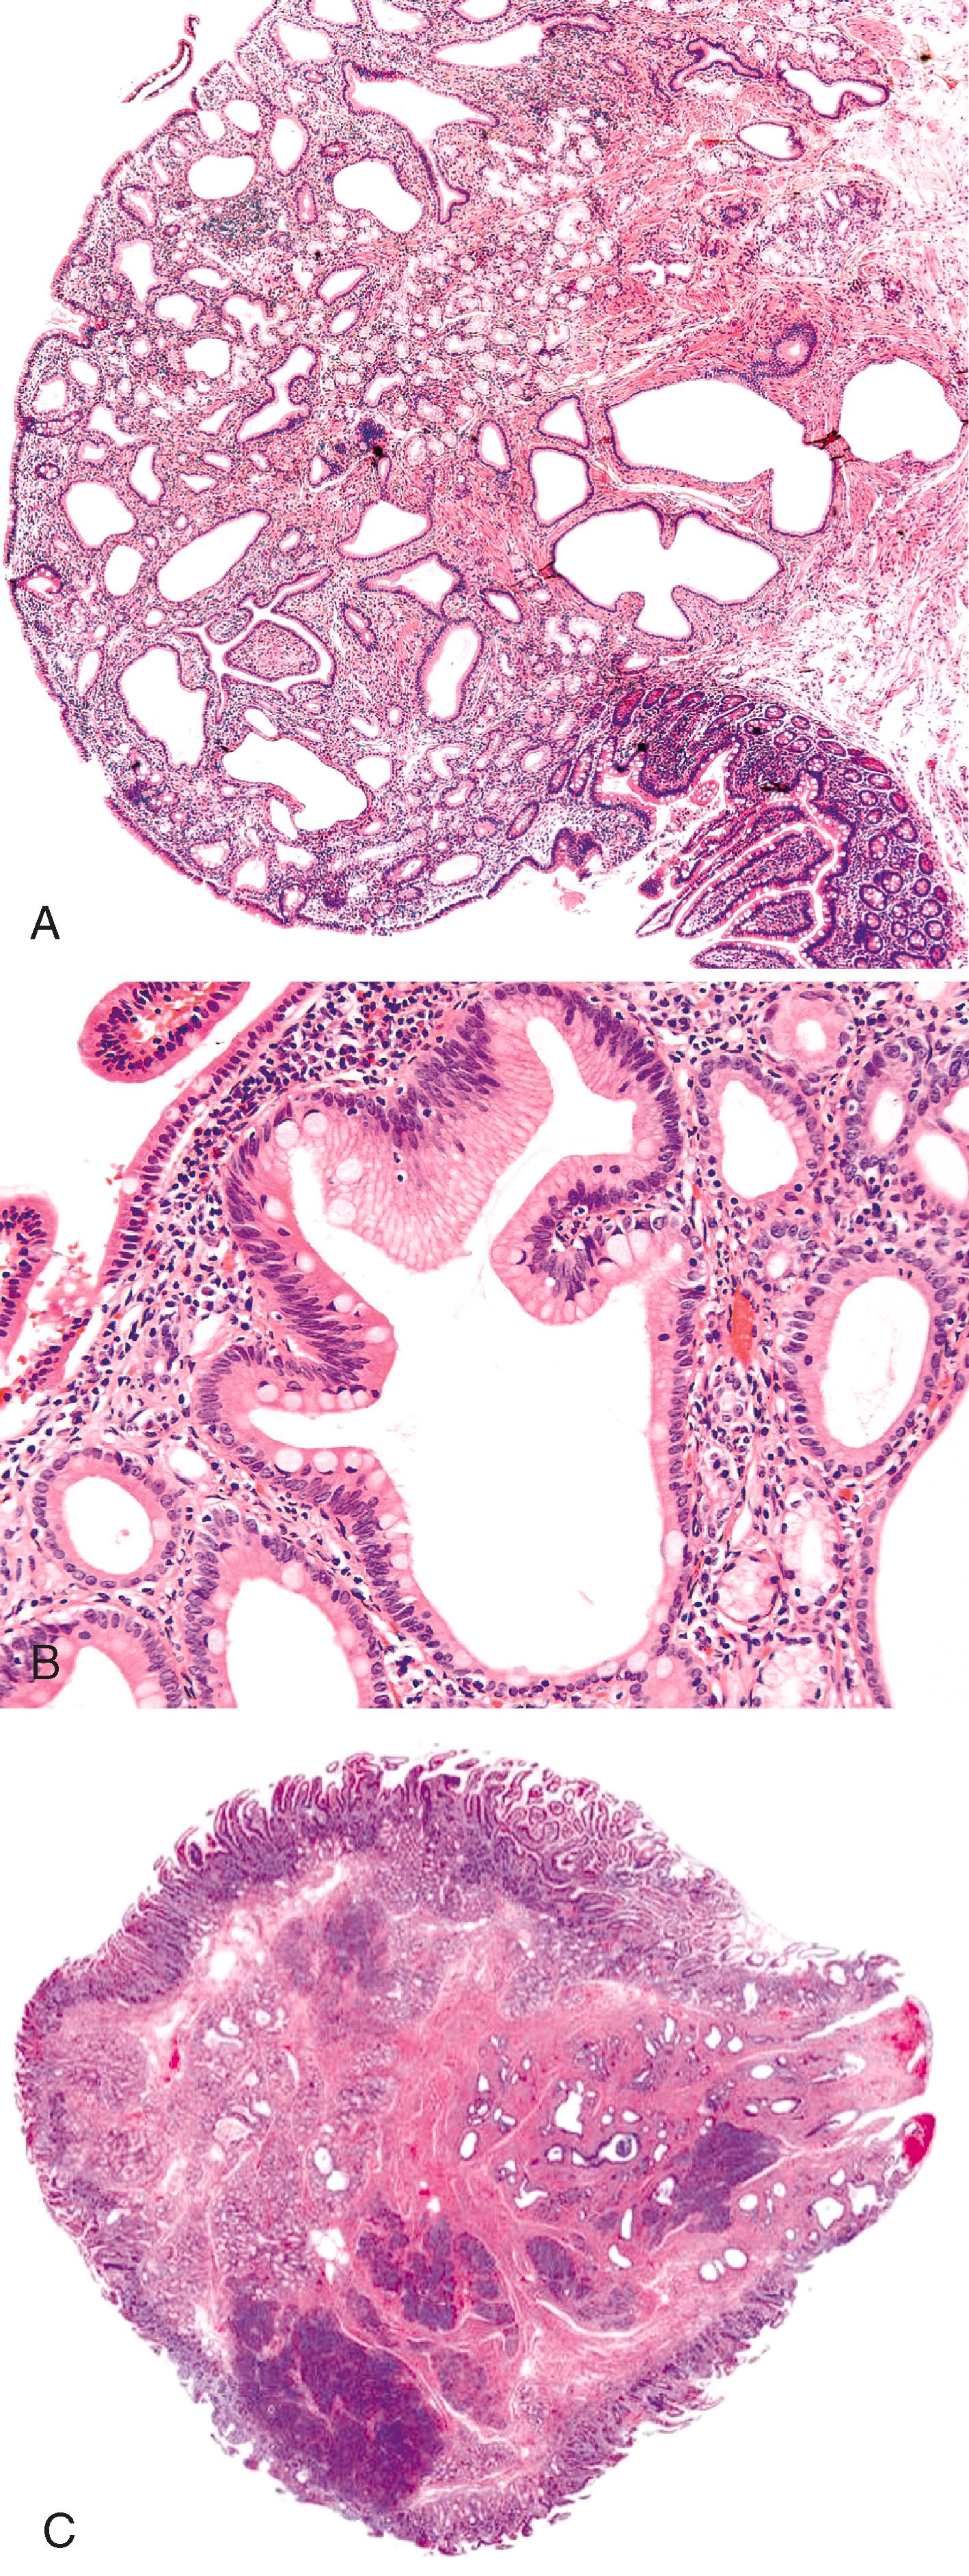 FIGURE 42.3, The minor papilla is similar to the major papilla morphologically. It shows intestinal-type mucosa that transitions into a papilla, which is composed of pancreatobiliary-type ductules (A) and specialized epithelium with mucinous features and scattered goblet cells (B). Pancreatic lobules (C) and clusters of neuroendocrine cells may be seen on the wall of the minor papilla.